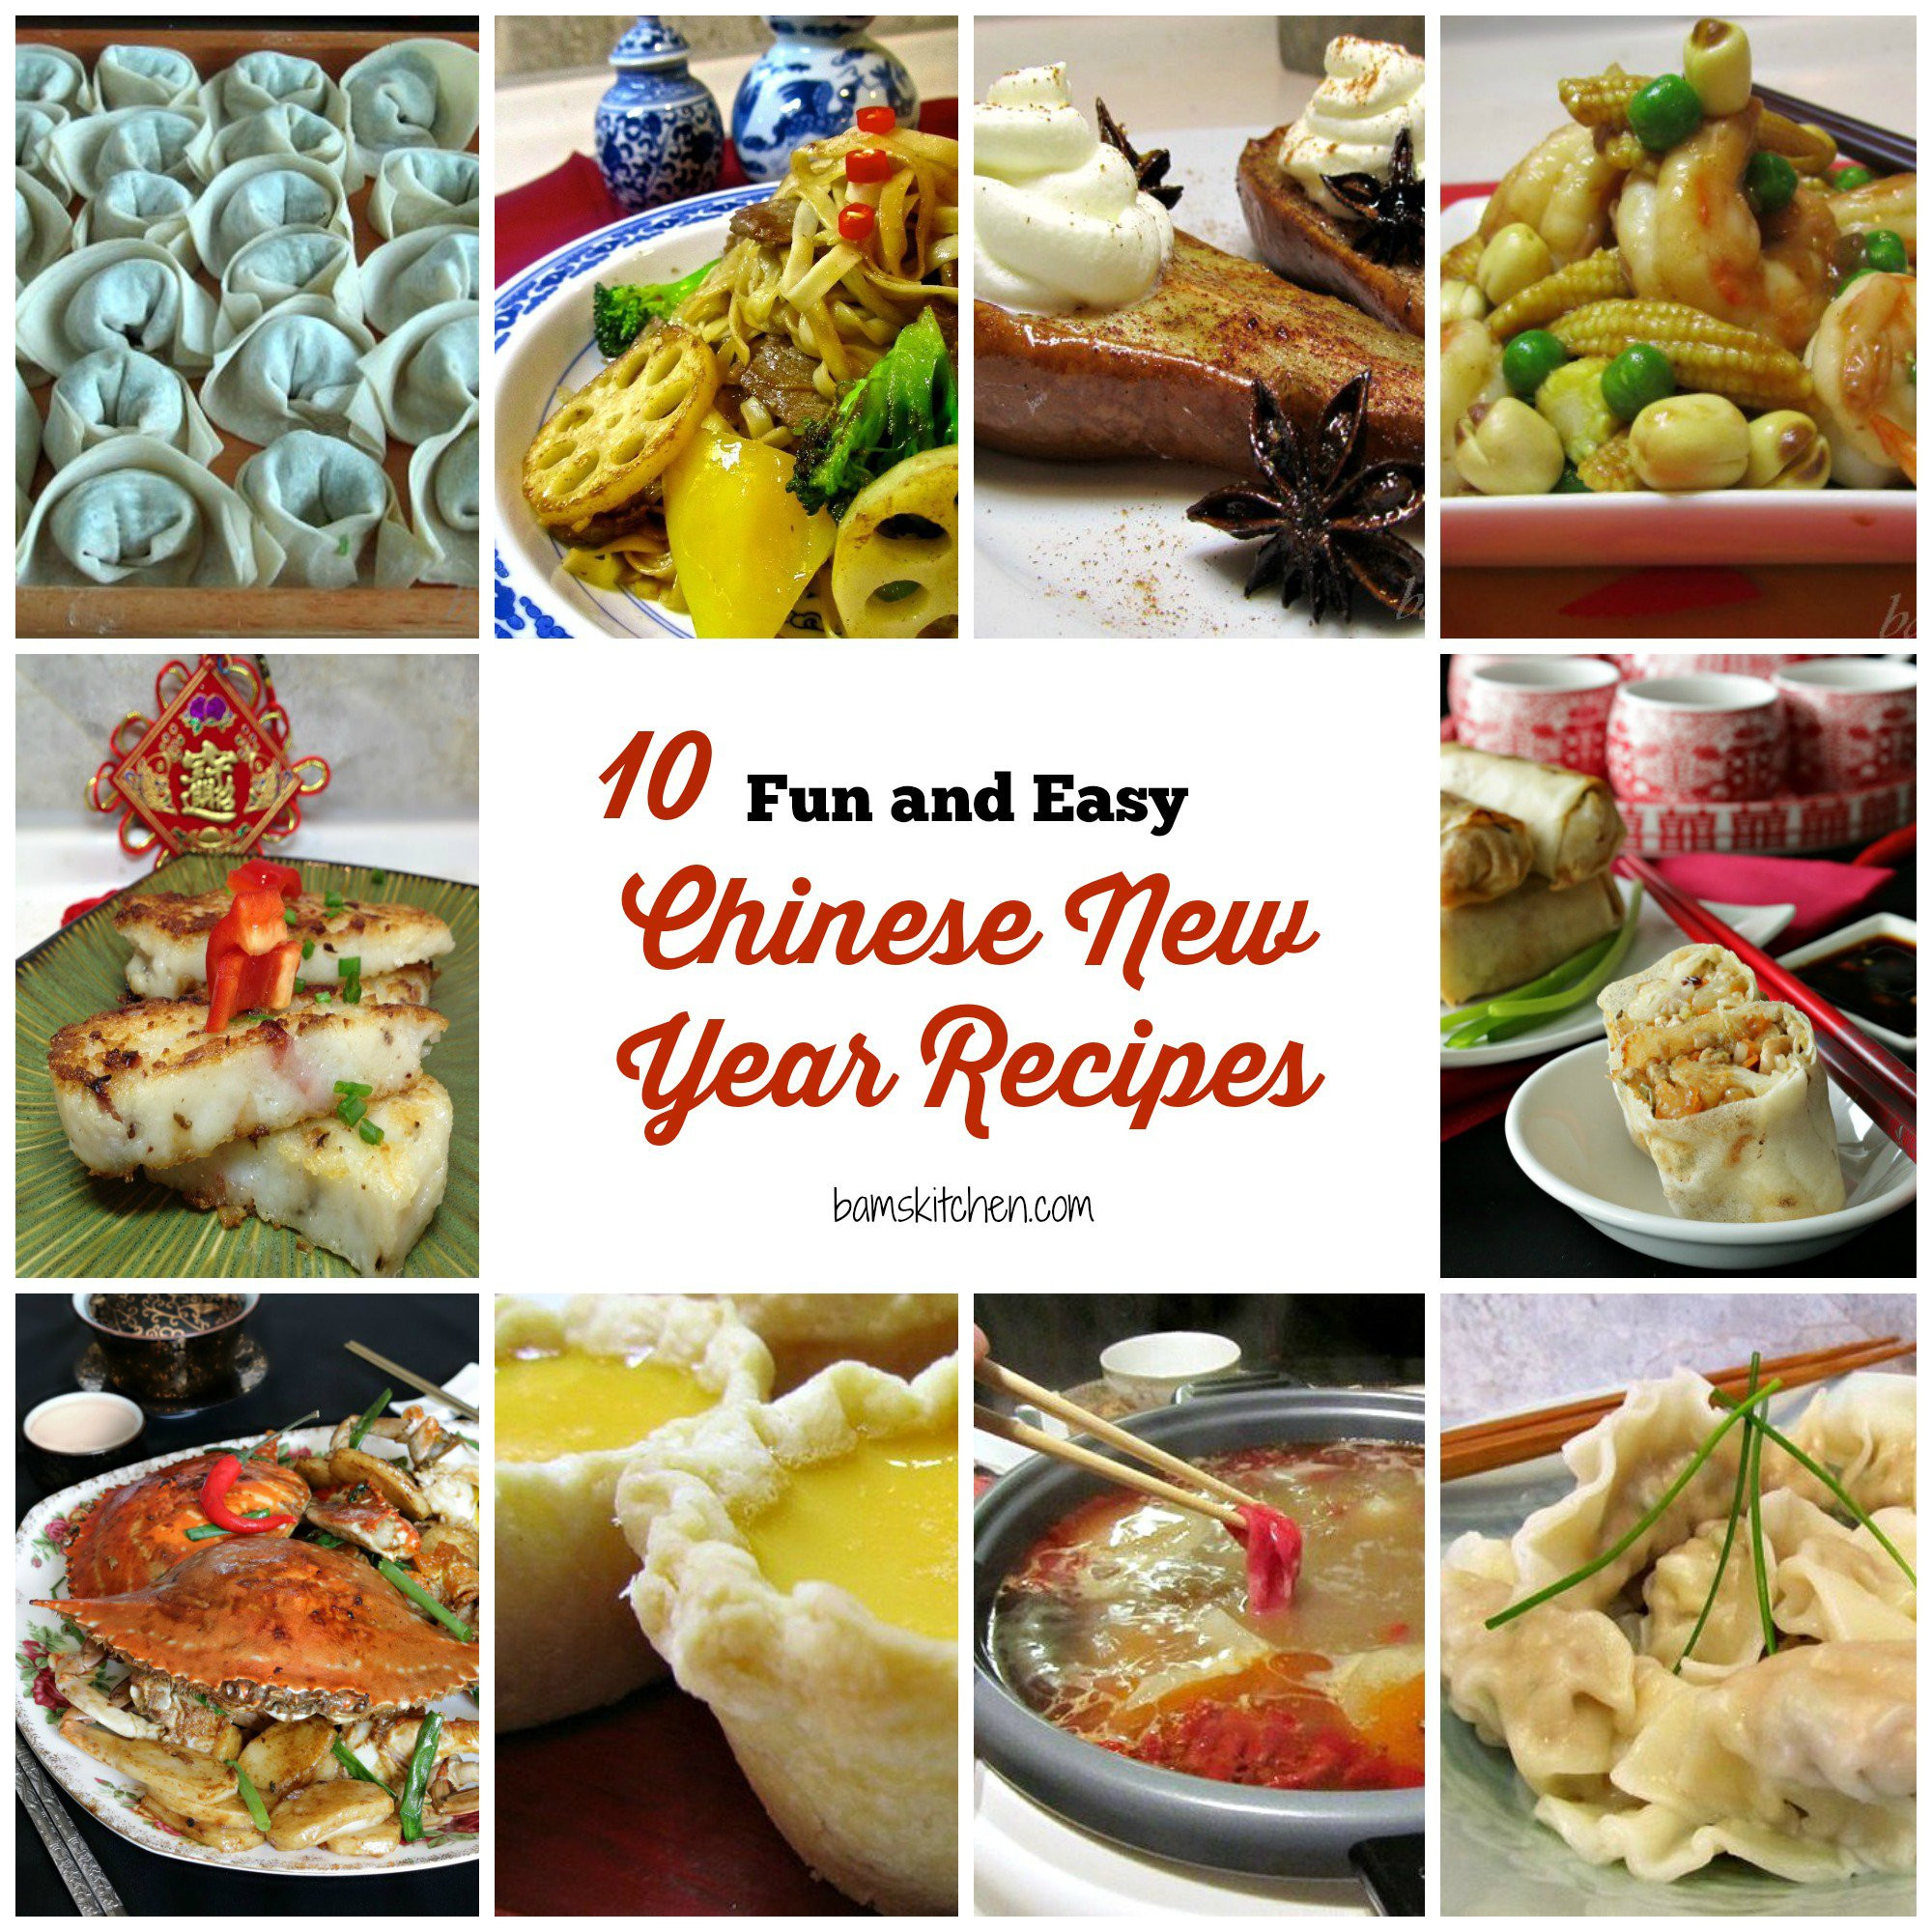 Chinese New Year Dishes Recipes
 Bam s Kitchen 10 Fun and Easy Chinese New Year Recipes